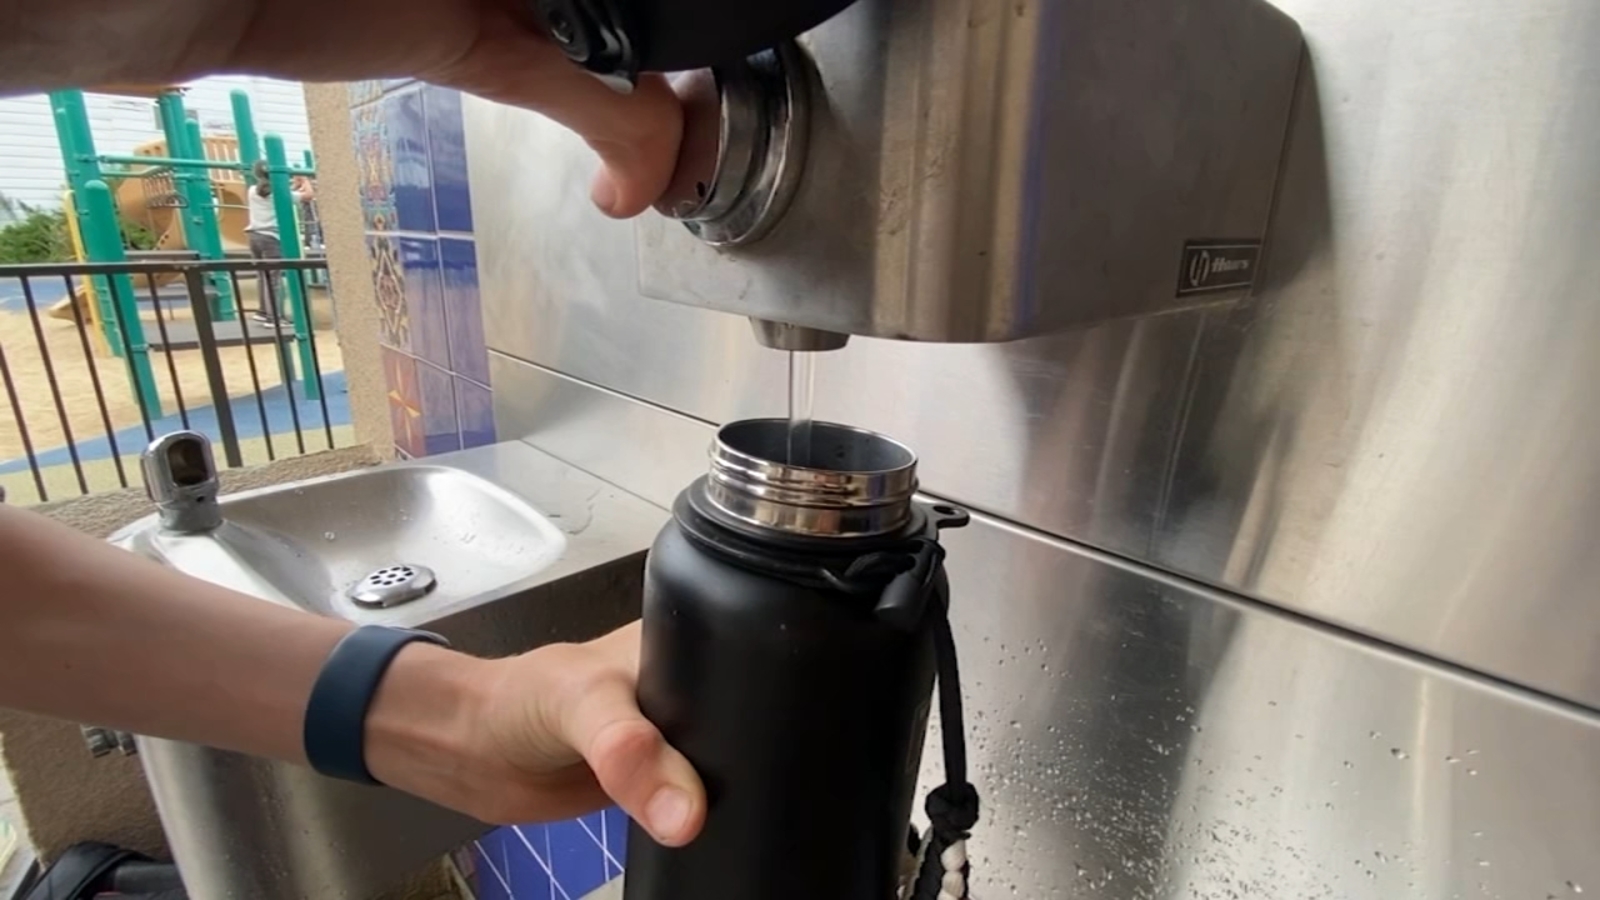 San Francisco’s water bottle refilling stations are safe, experts say. So, why don’t people use them? [Video]